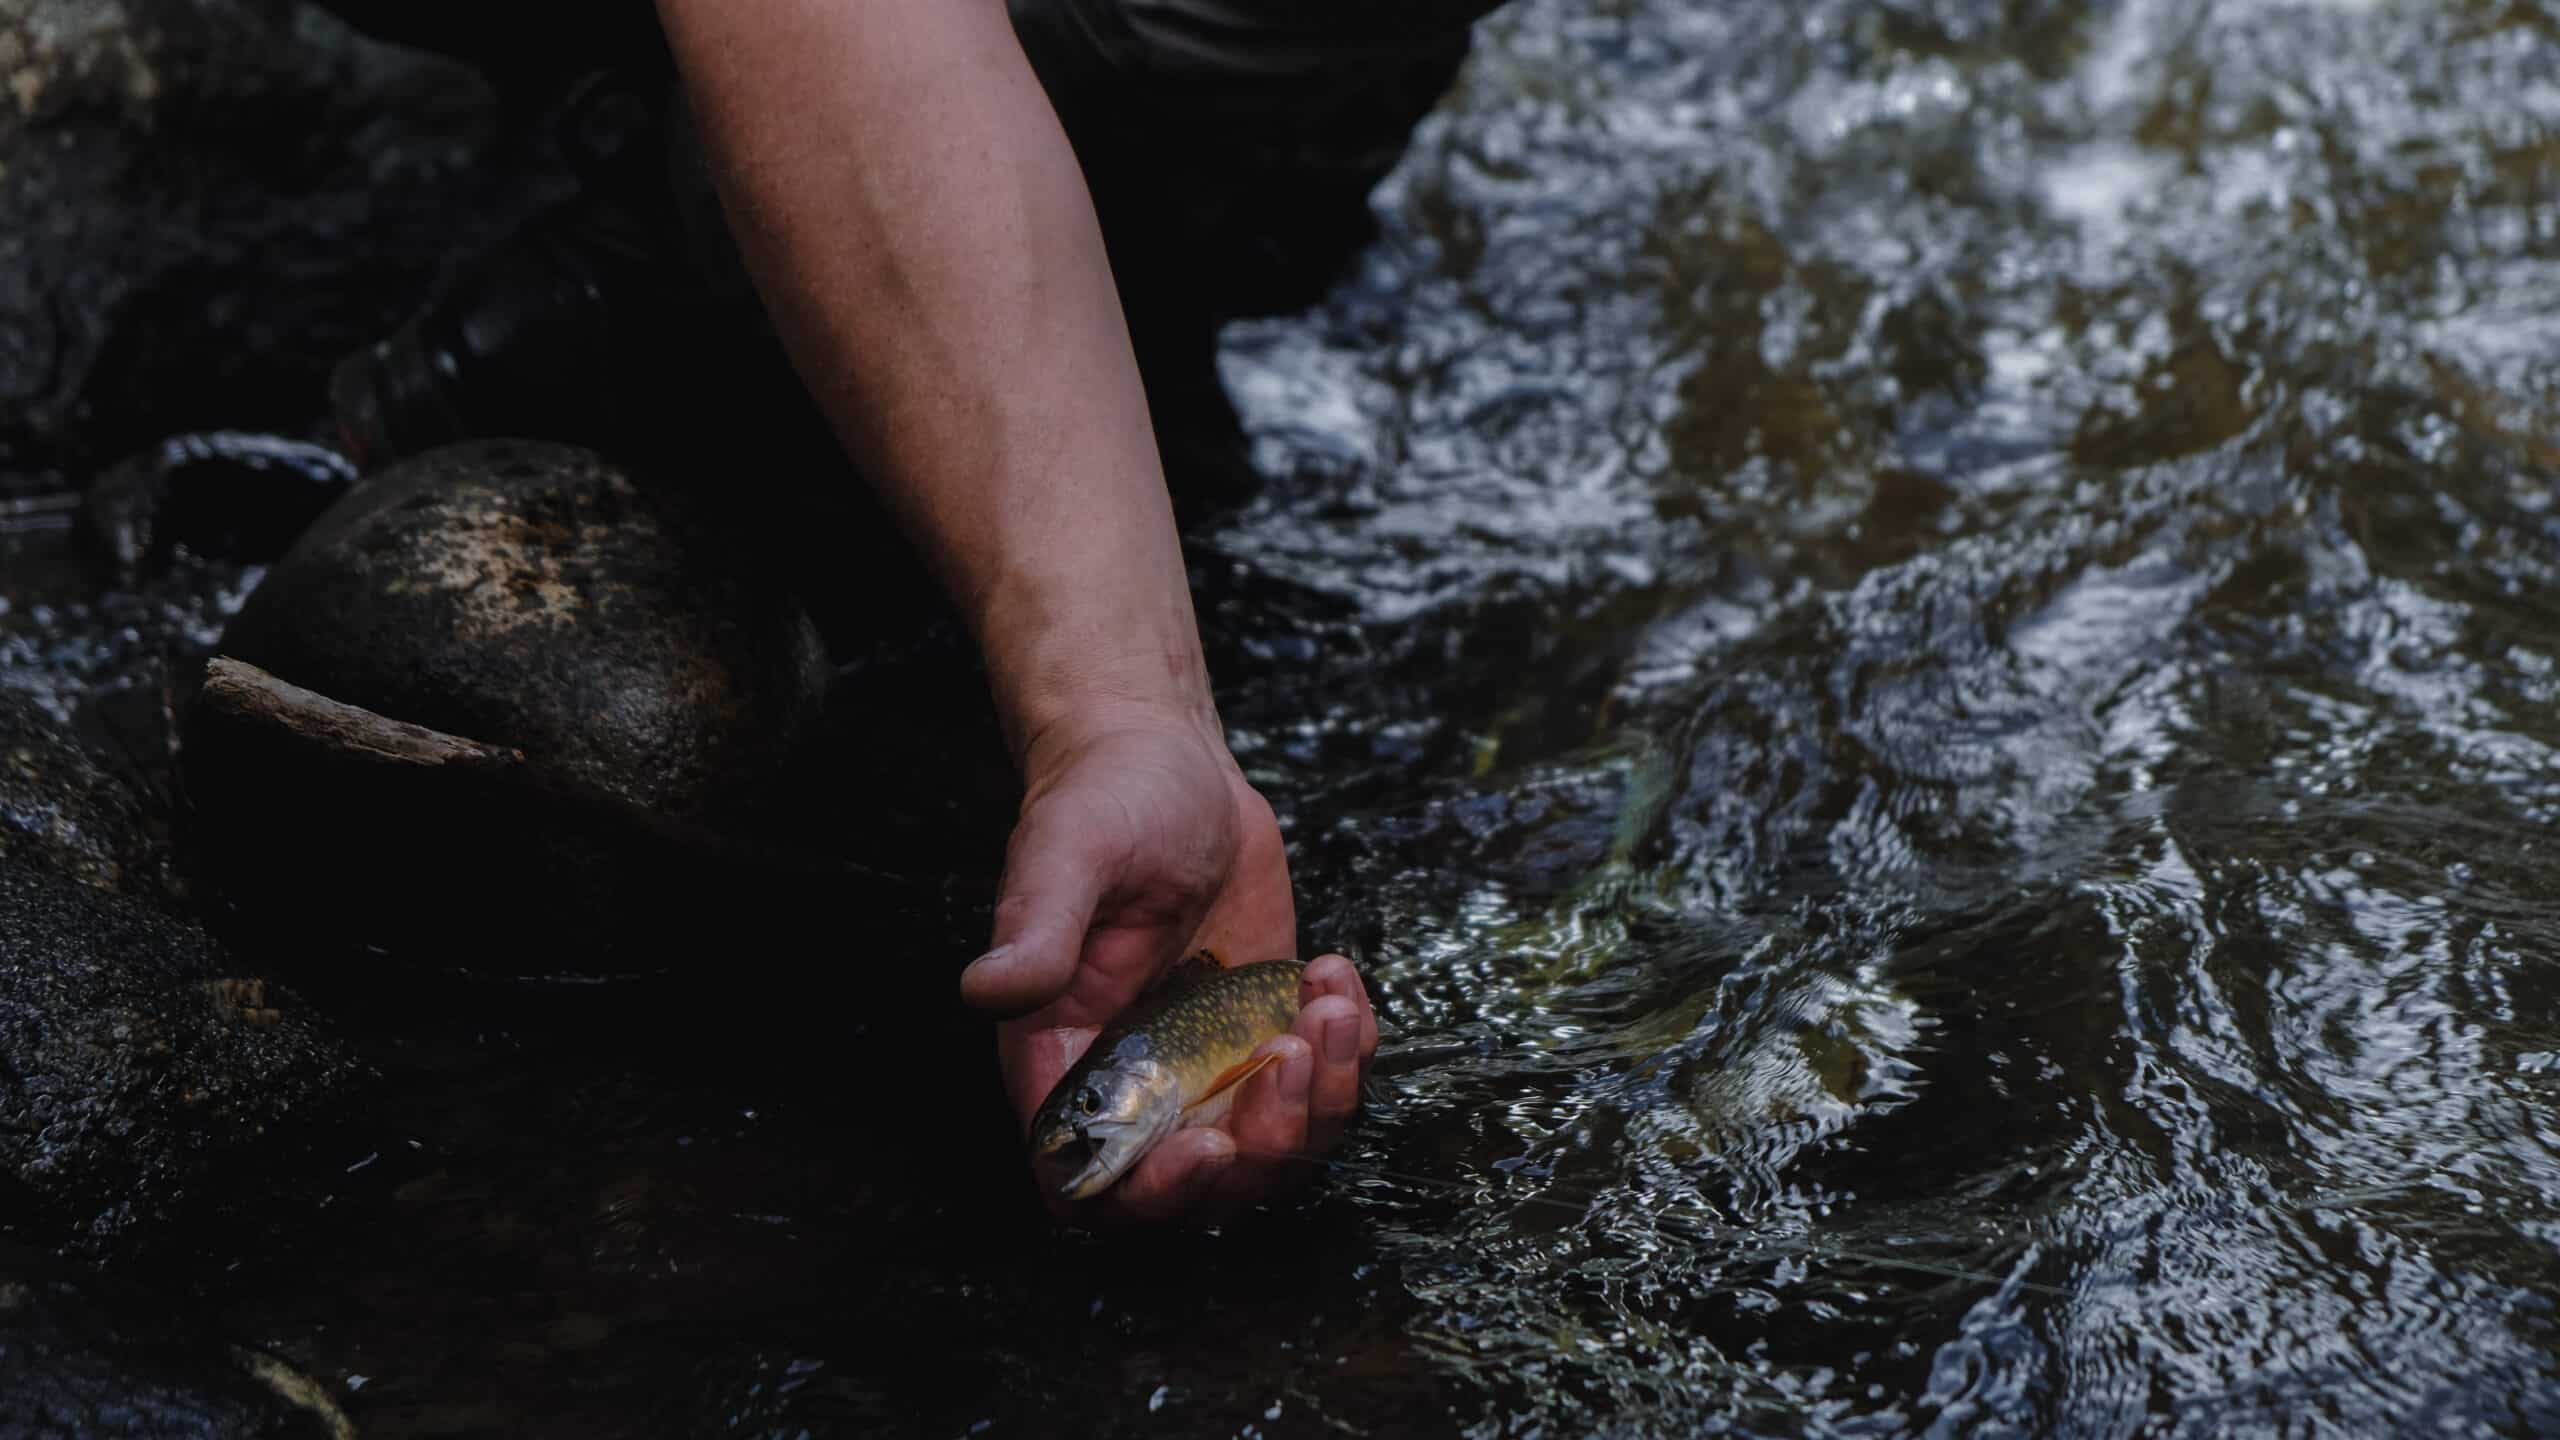 Why We Fish: In Defense of Fishing